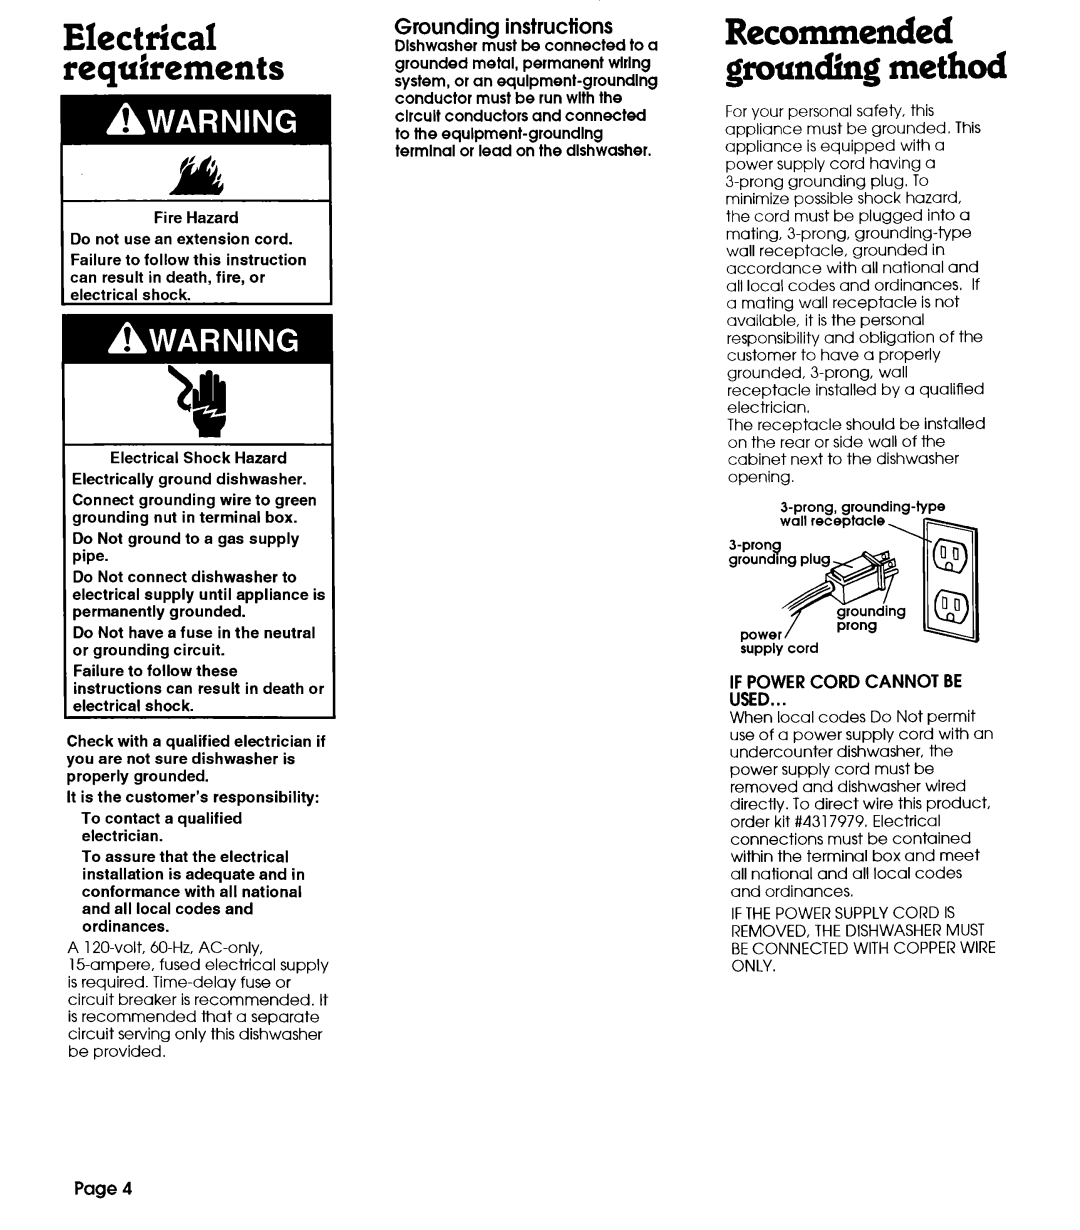 Whirlpool 801 grounding method, Electrical requirements, Grounding instructions, If Powercord Cannot Be Used, Page 